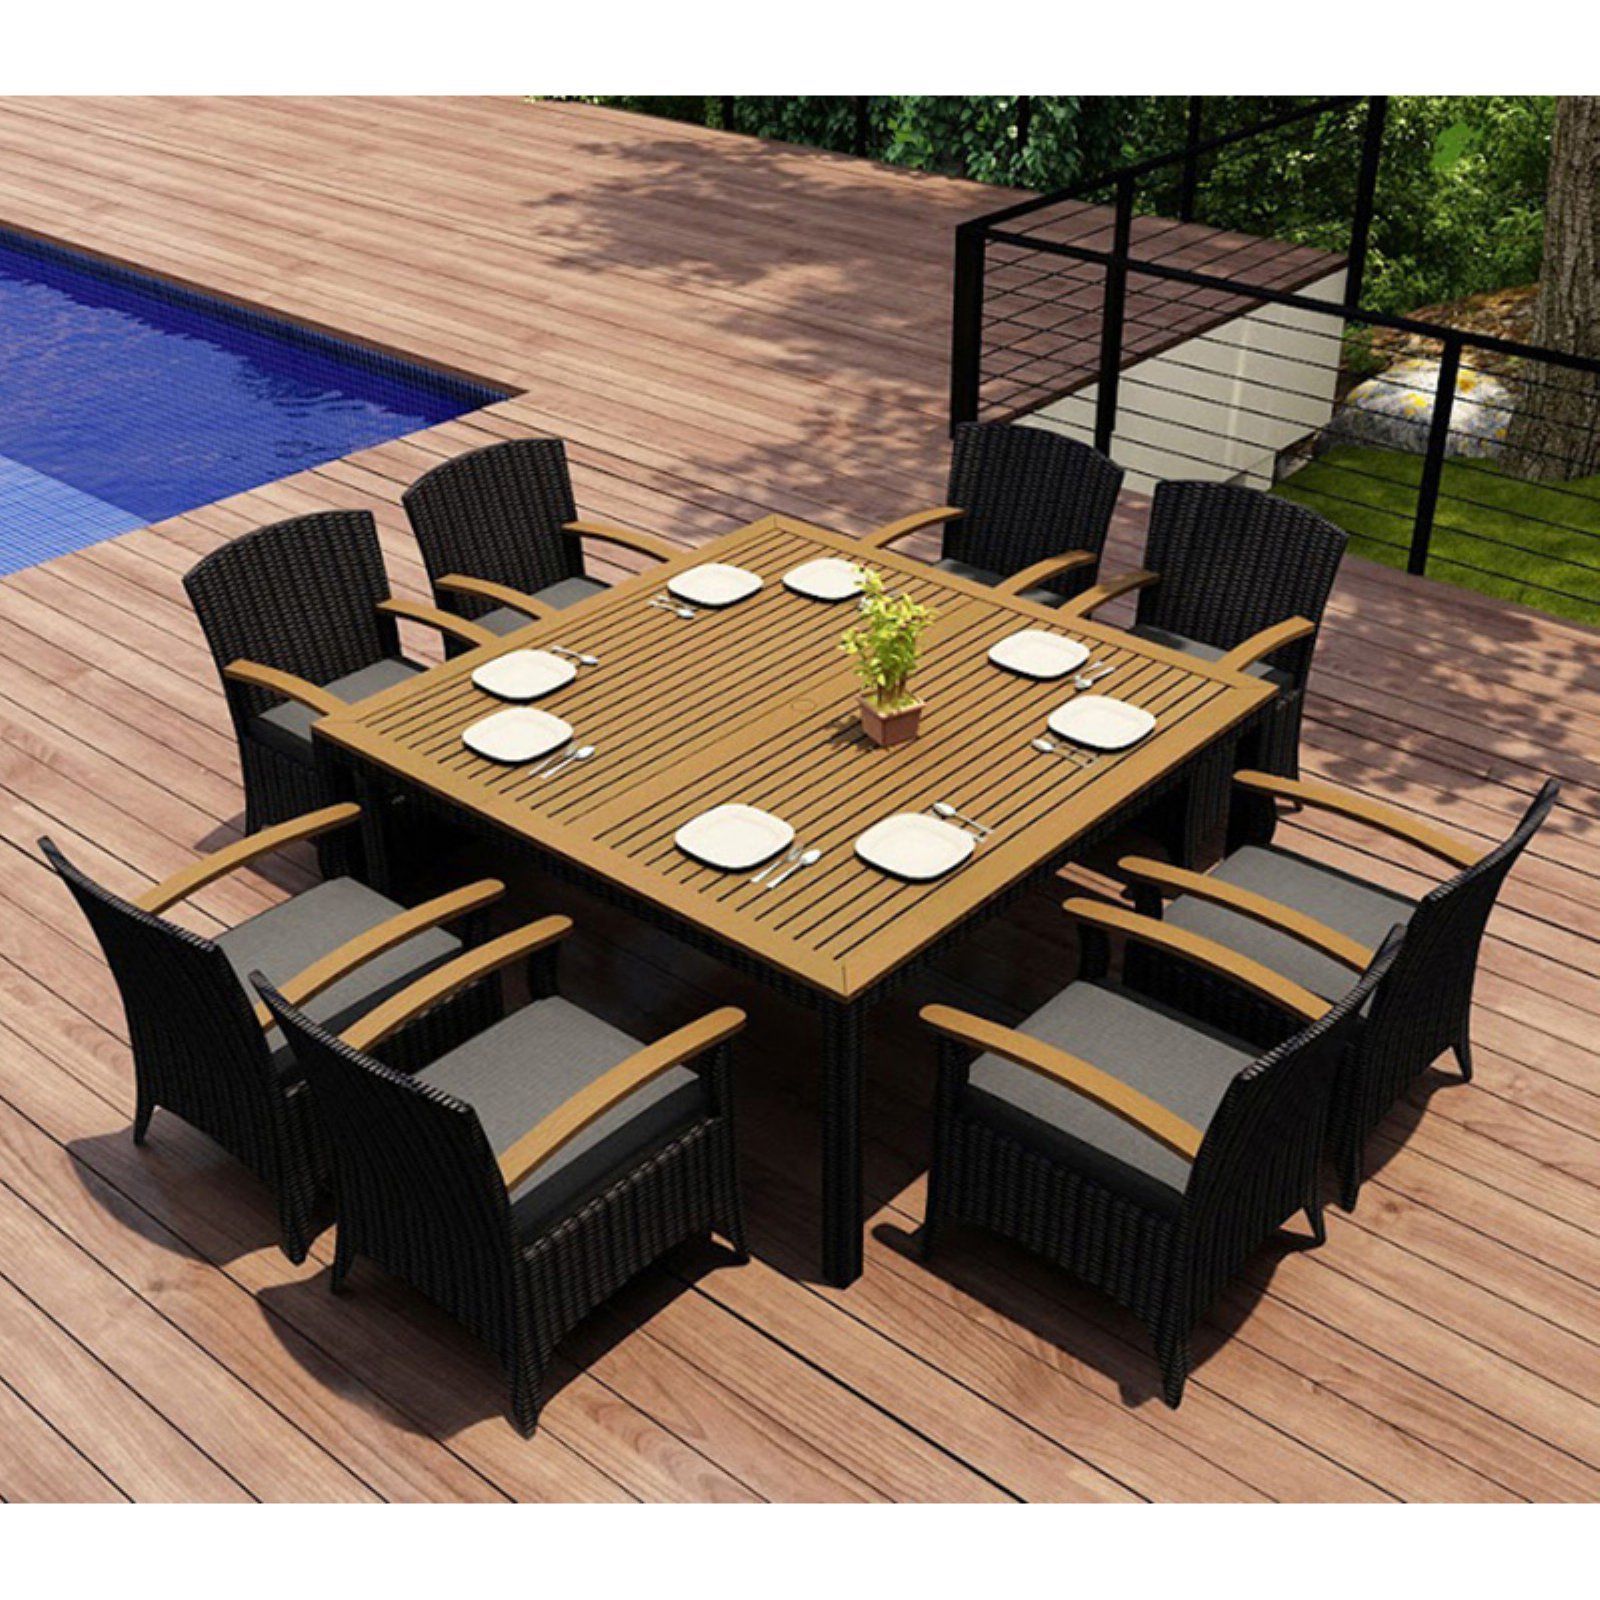 Outdoor Harmonia Living Arbor 9 Piece Square Dining Set With Arm Chair For Wicker Square 9 Piece Patio Dining Sets (View 1 of 15)